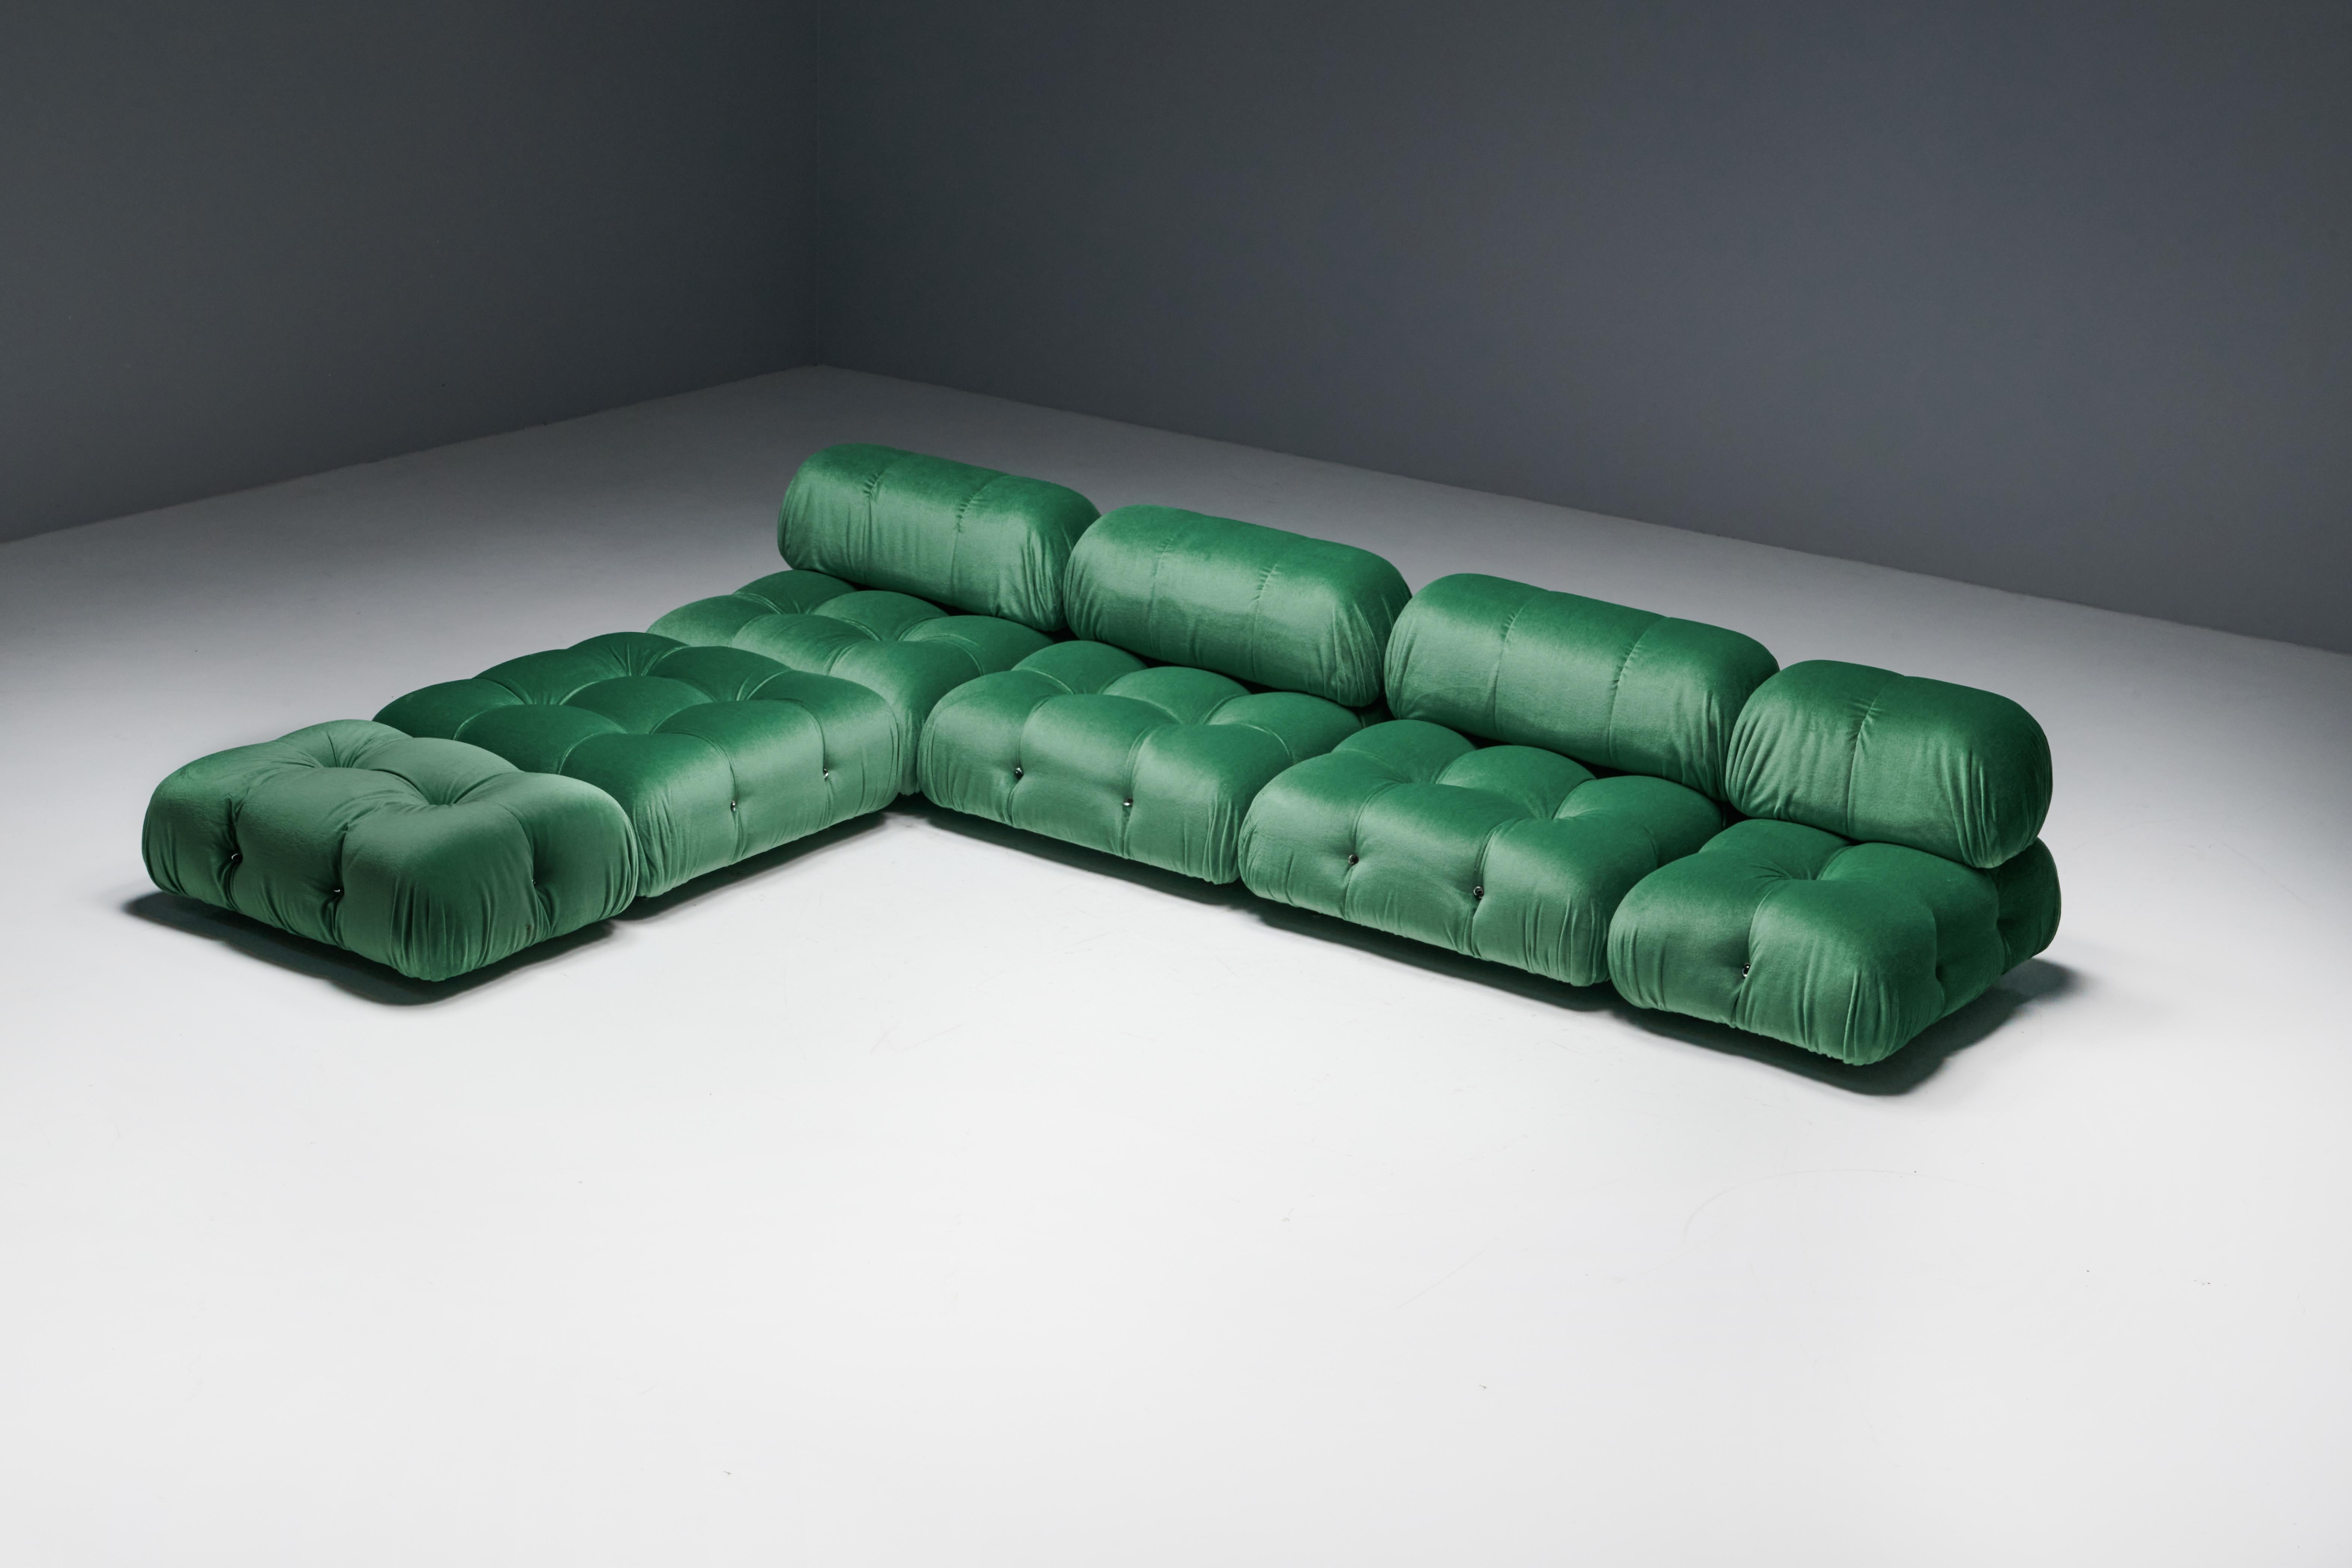 Camaleonda modular sofa by Mario Bellini for B&B Italia, a timeless piece of furniture that emerged in the design scene during the 1970s. Comprising four large and two smaller seating elements, all equipped with backrests, this iconic sofa has been